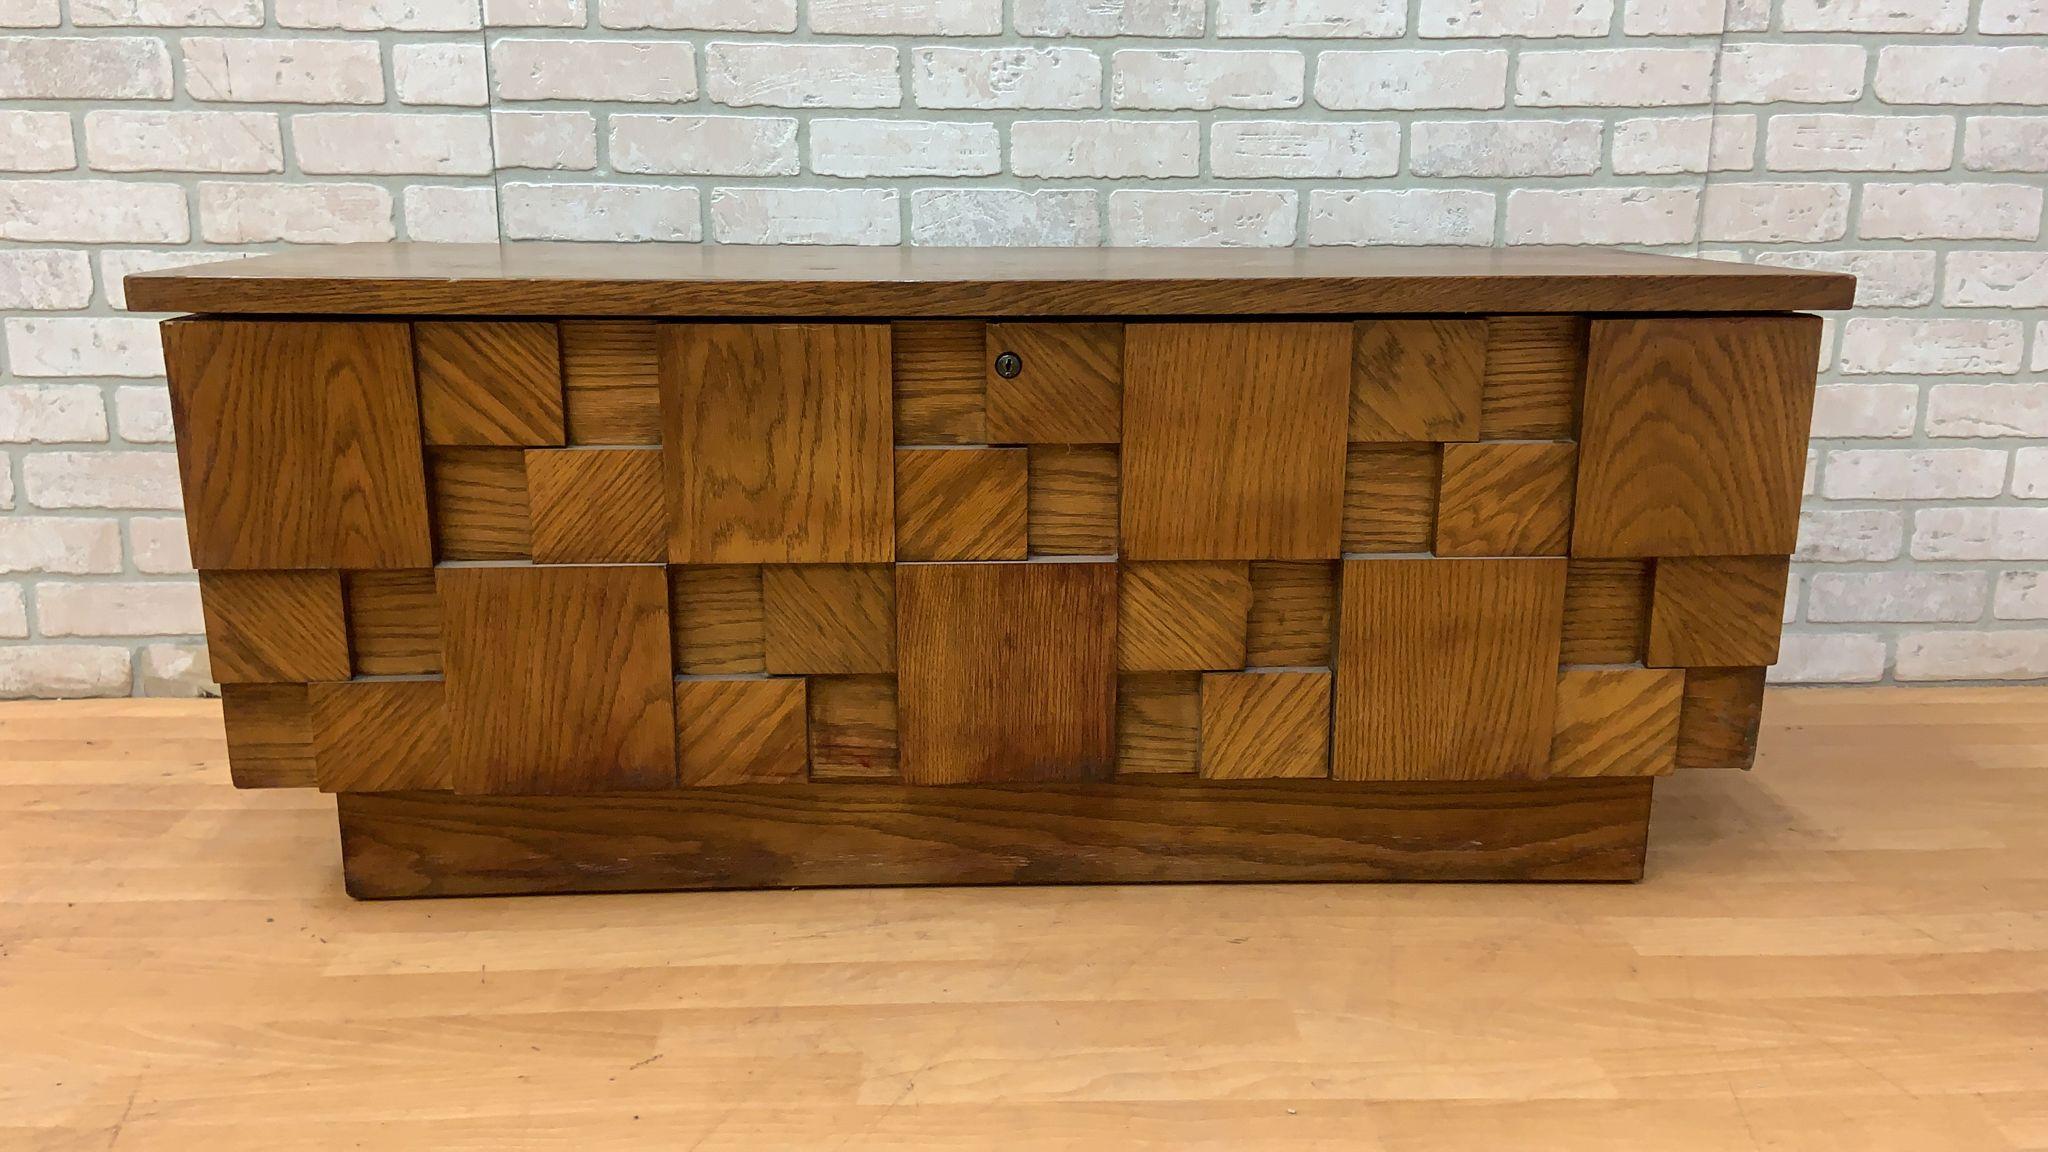 Mid-Century Modern rare lane Brutalist Mosaic hope chest Paul Evans style

Fabulous Lane Brutalist mosaic chunky walnut hope chest. This piece is particularly rare and hard to find. The chest is well thought out and constructed. Fully lined with